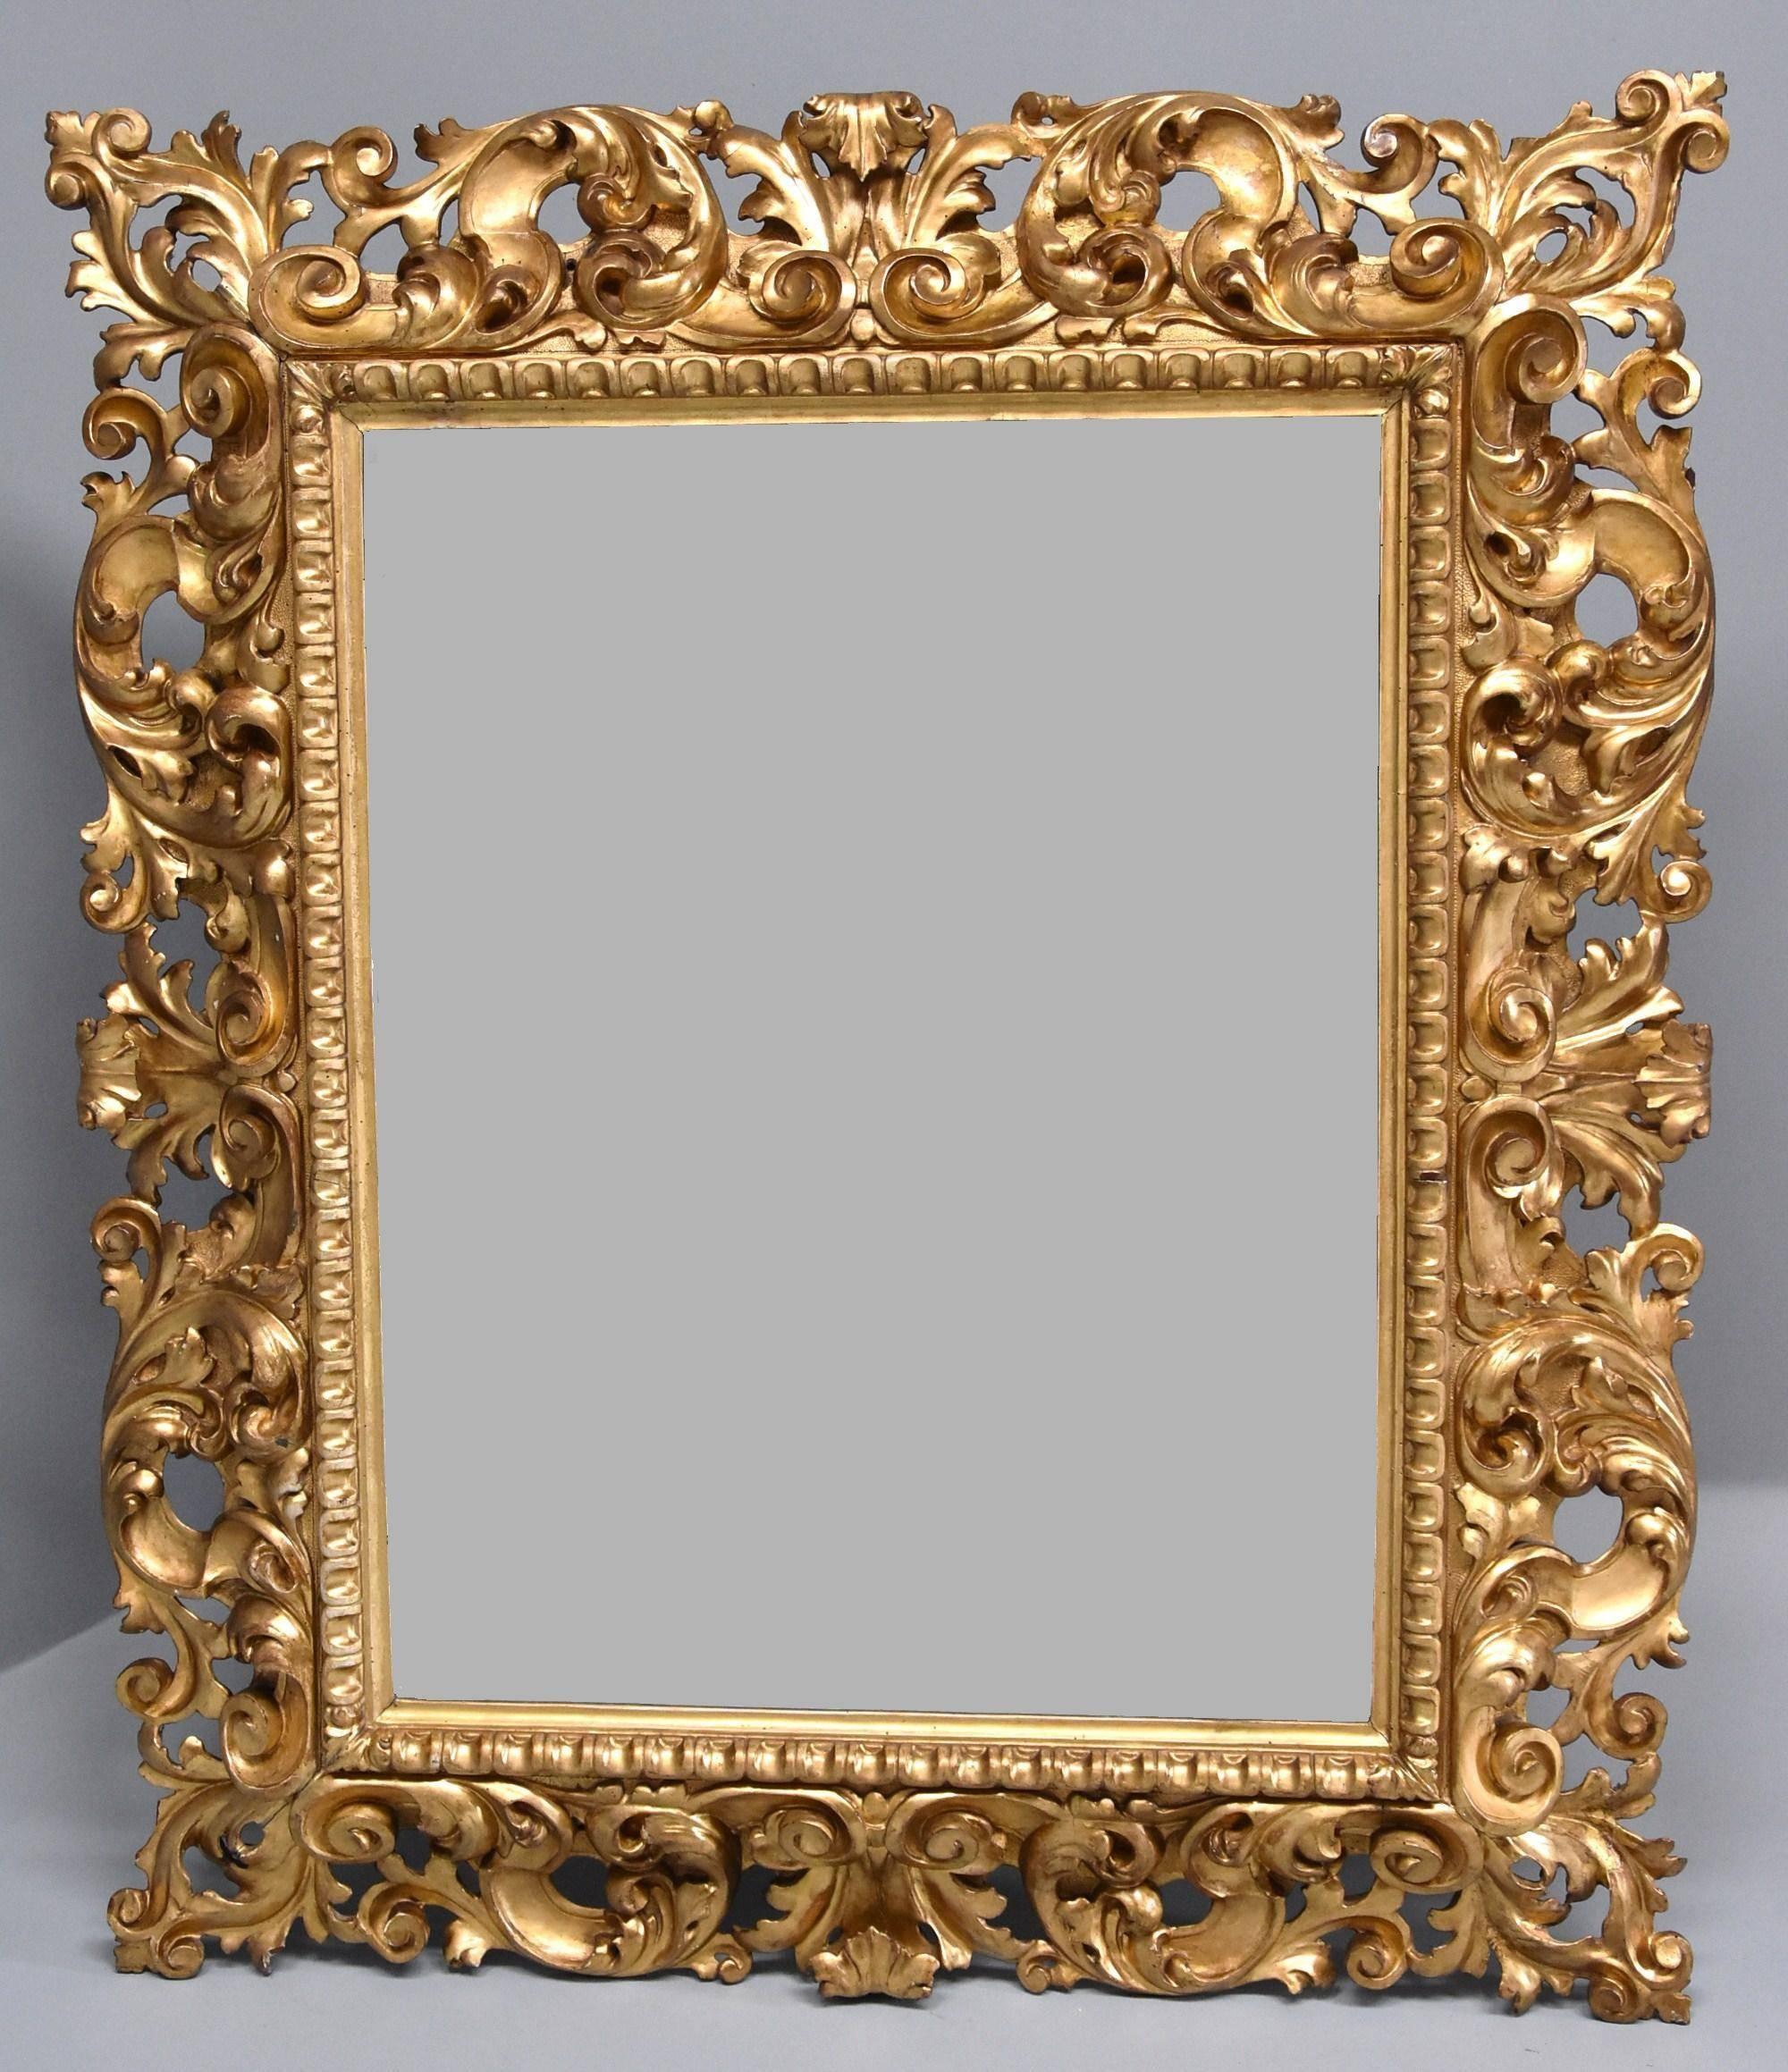 A superbly carved and highly decorative large late 19th century Florentine carved giltwood mirror.

This mirror consists of a superbly carved gilt wooden frame of scrolling acanthus leaf decoration in very good original condition with very small